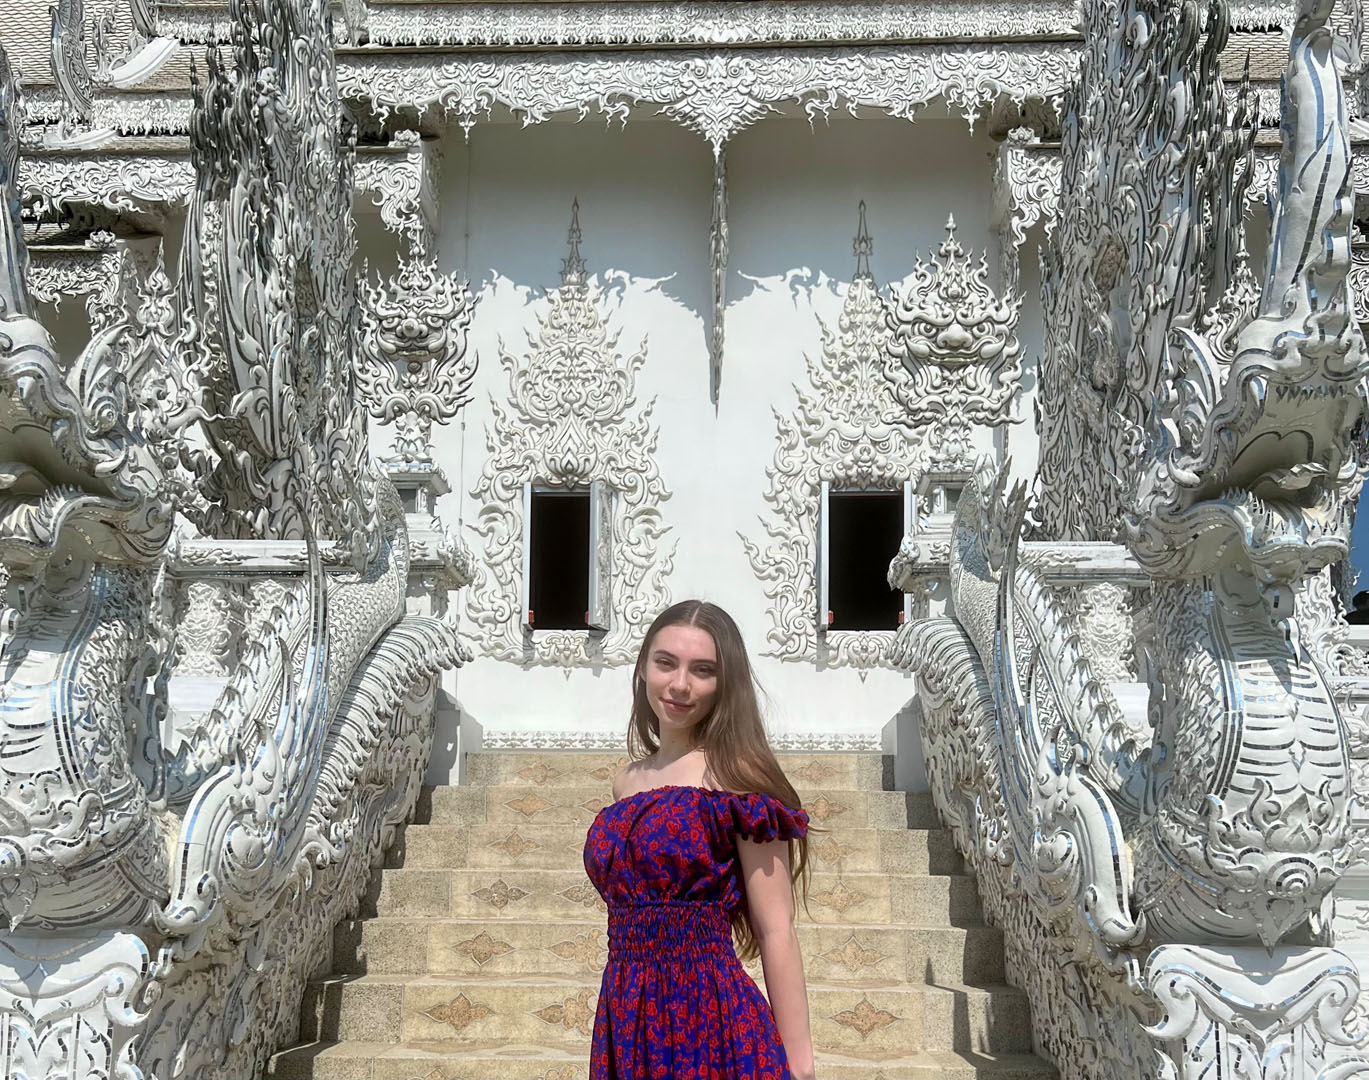 Shaian Gutierrez '22 took a trip from her international art school in Hong Kong to visit the exquisite temples and stunning architecture in Chiang Mai, Thailand. This is the White Temple.